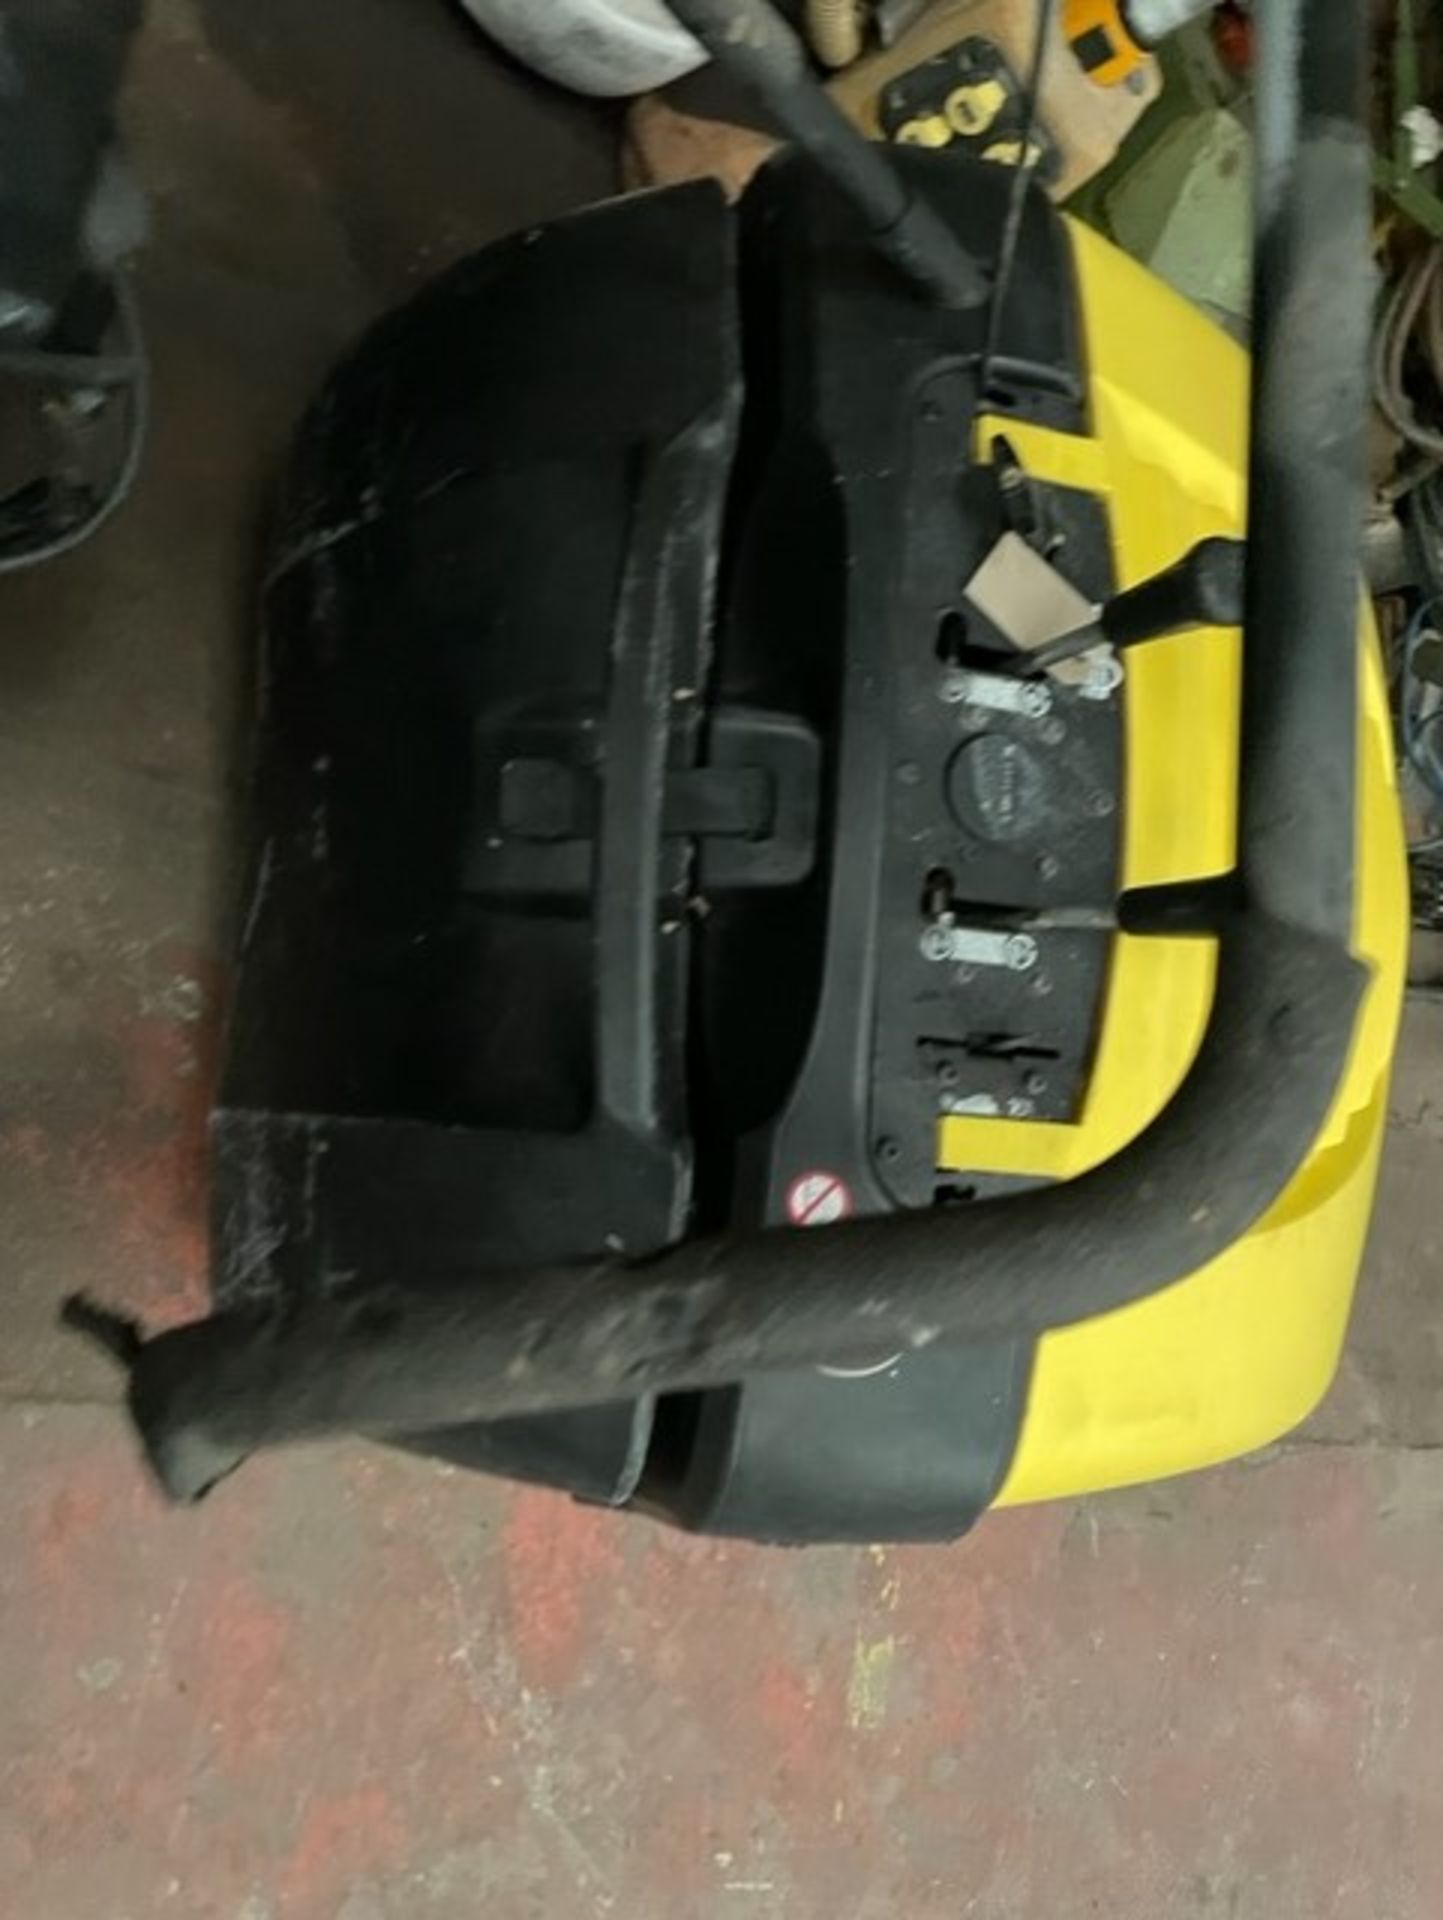 Looking tidy a karcher floor sweeper has a gx 160 engine on it  quite a bulky thing - Image 4 of 5